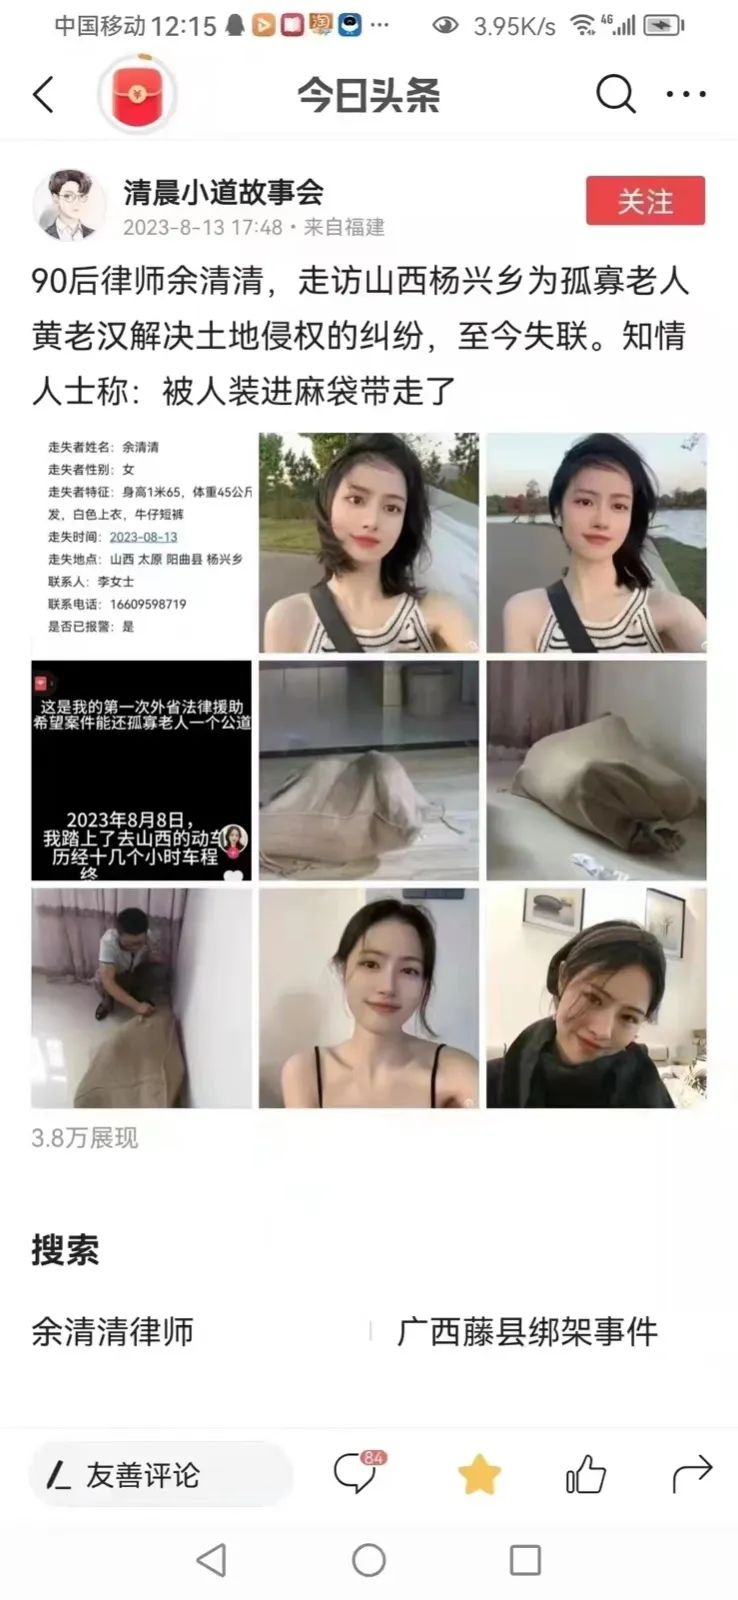 I responded that it was rumored online that a female lawyer was taken away in a burlap bag after visiting the countryside and lost contact with Liu Jiagedong Village | News | Burlap Bag